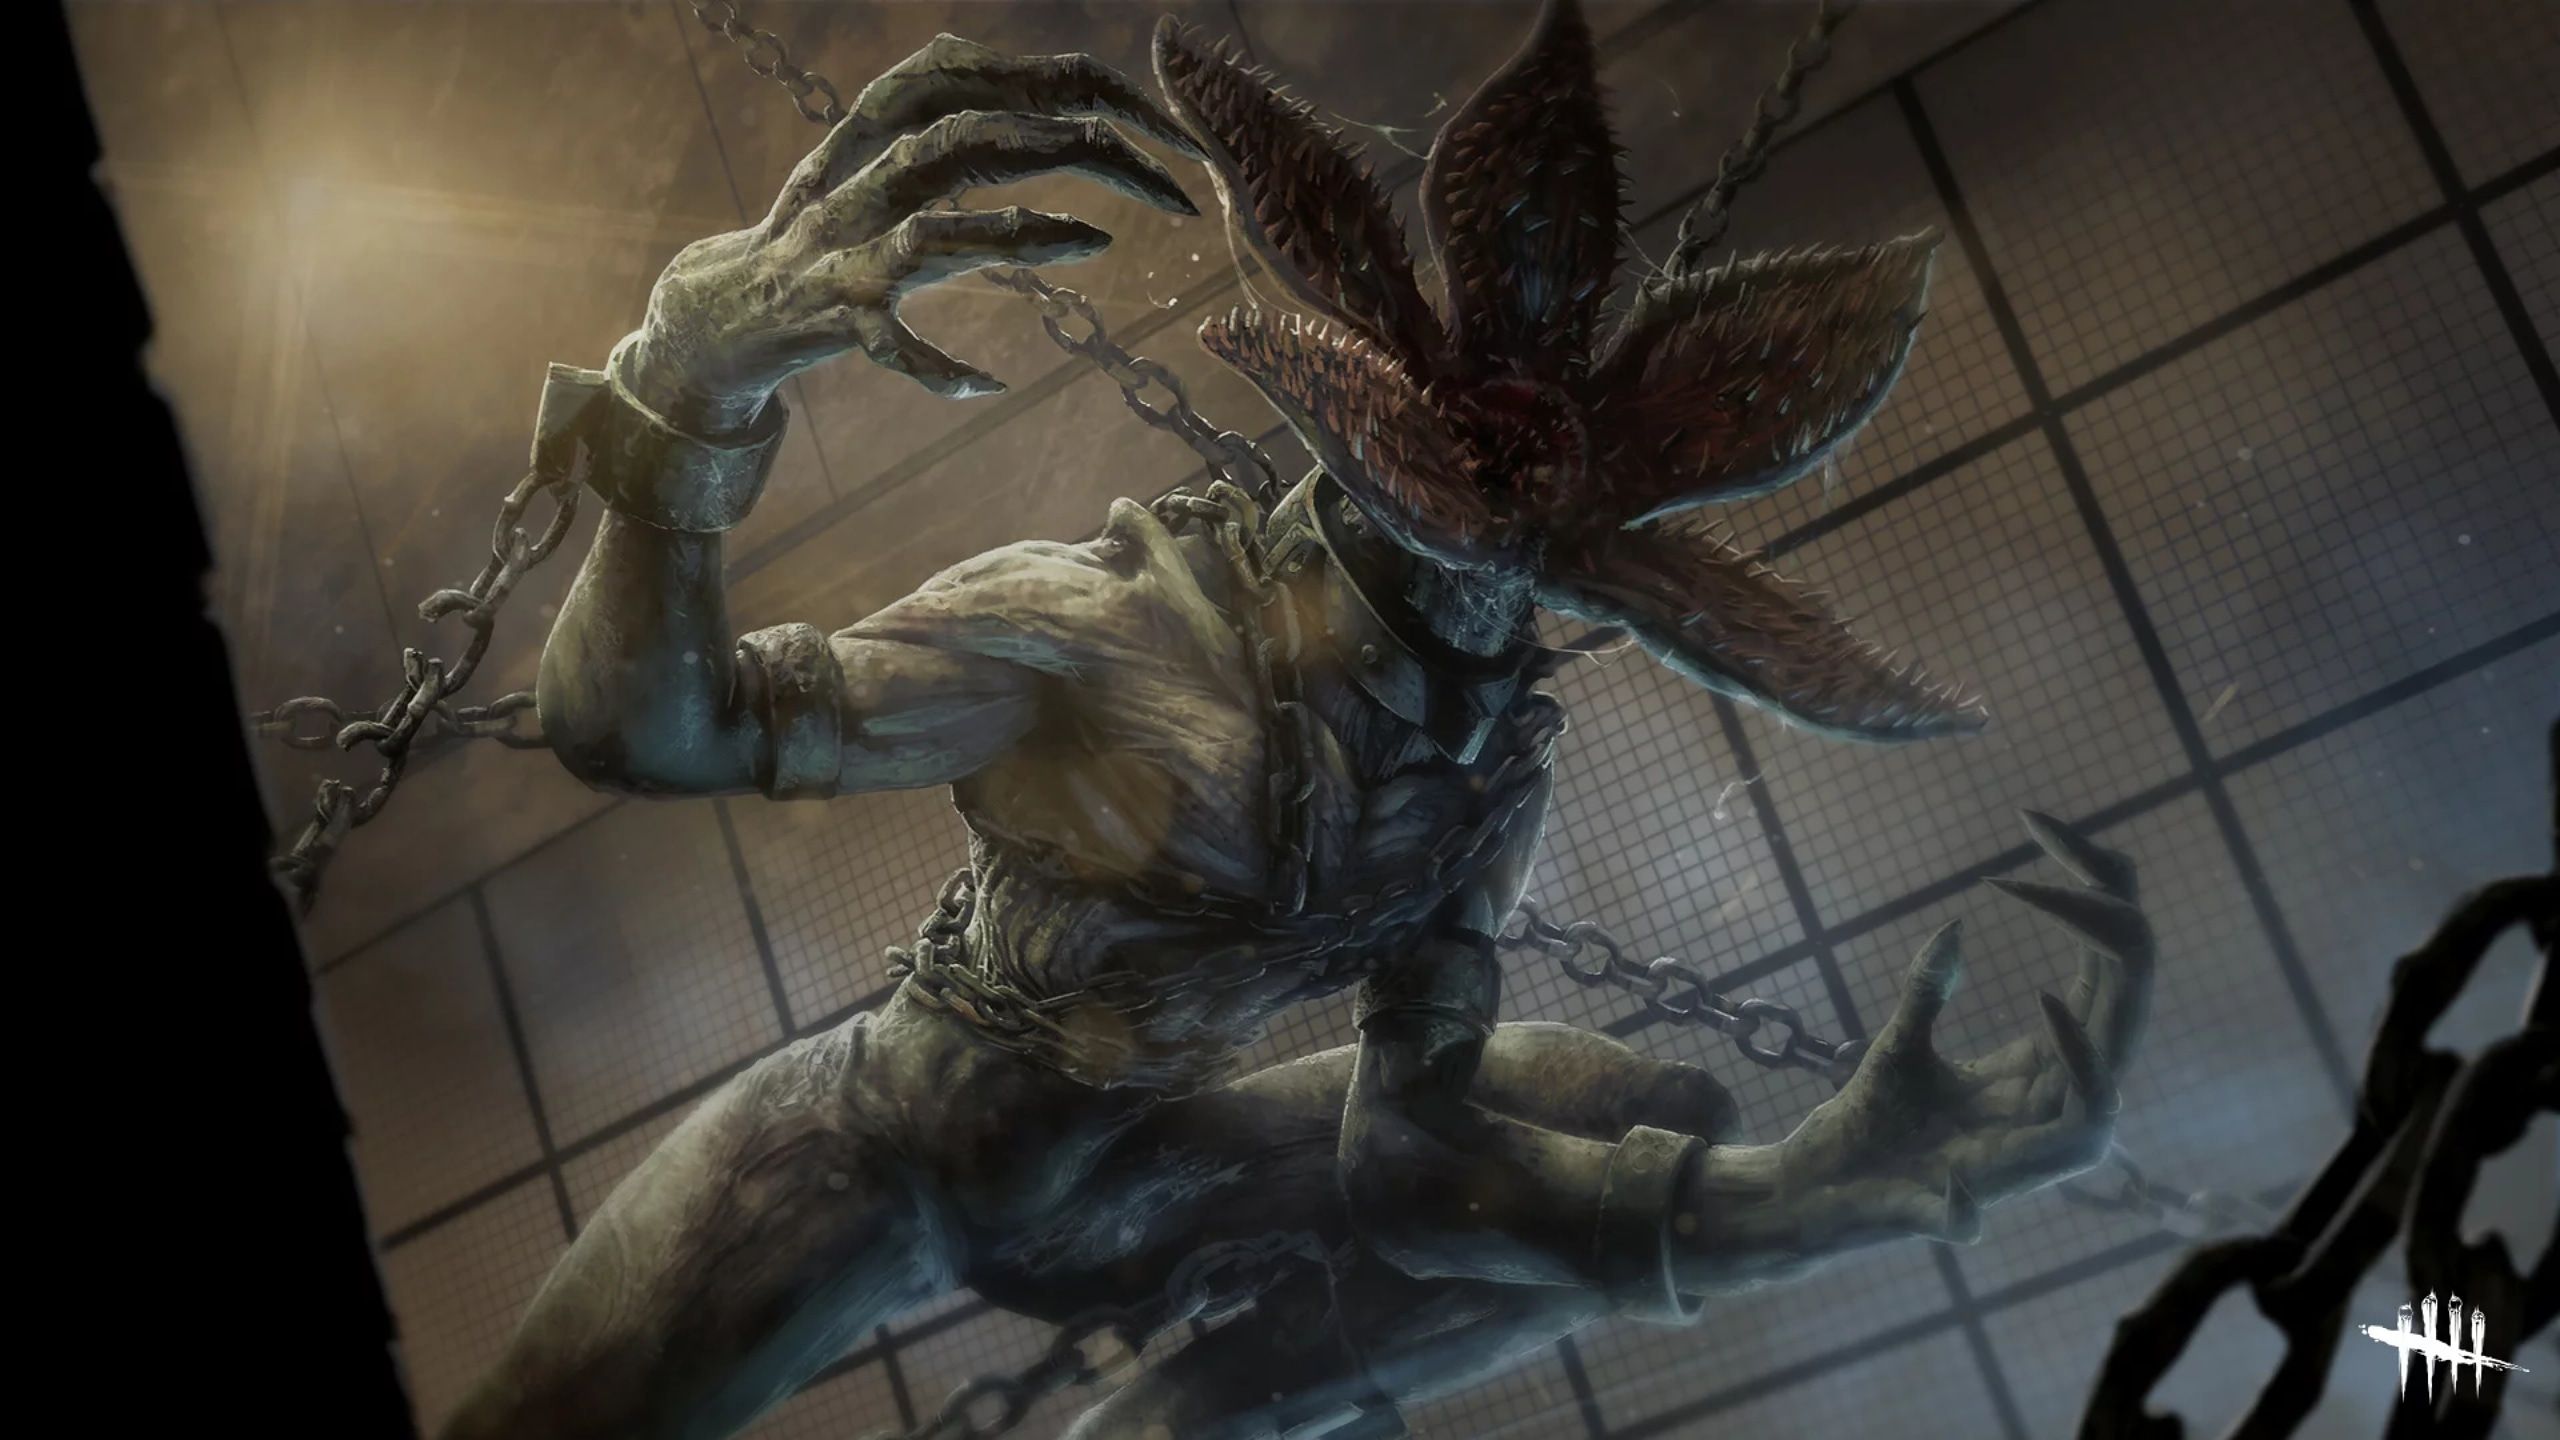 Anyone checking out the Stranger Things DLC in Dead by Daylight? Definitely the best DLC in that game! It's so much fun bein. Horror movie art, Horror, Demogorgon